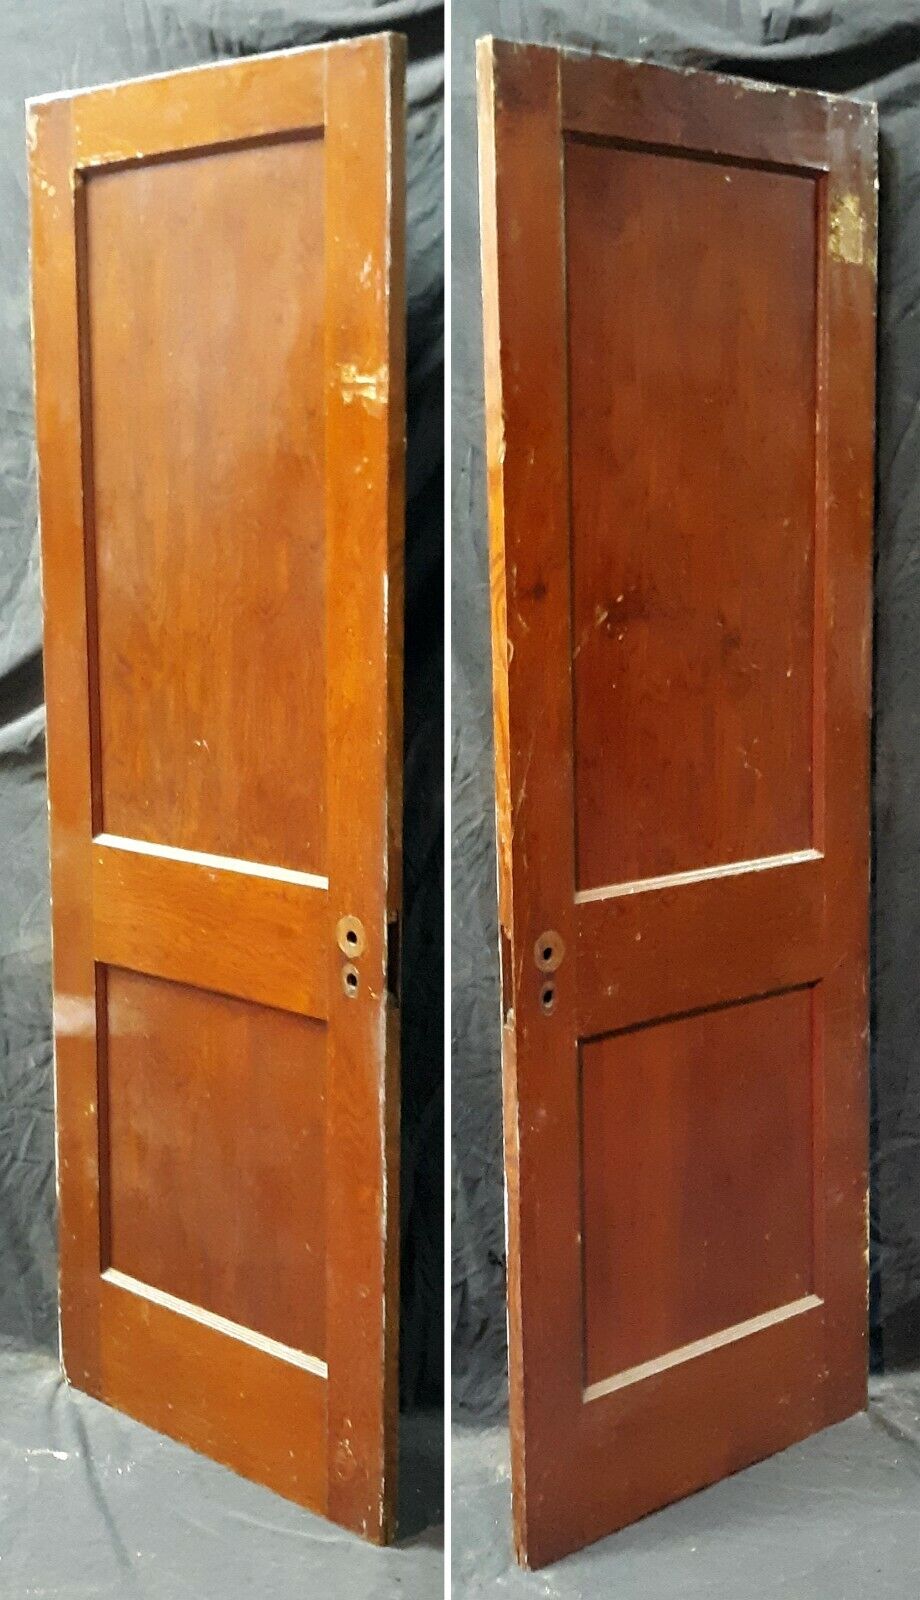 28"x77" Antique Vintage Old Reclaimed Salvaged Interior SOLID Wood Wooden Closet Pantry Door Panels